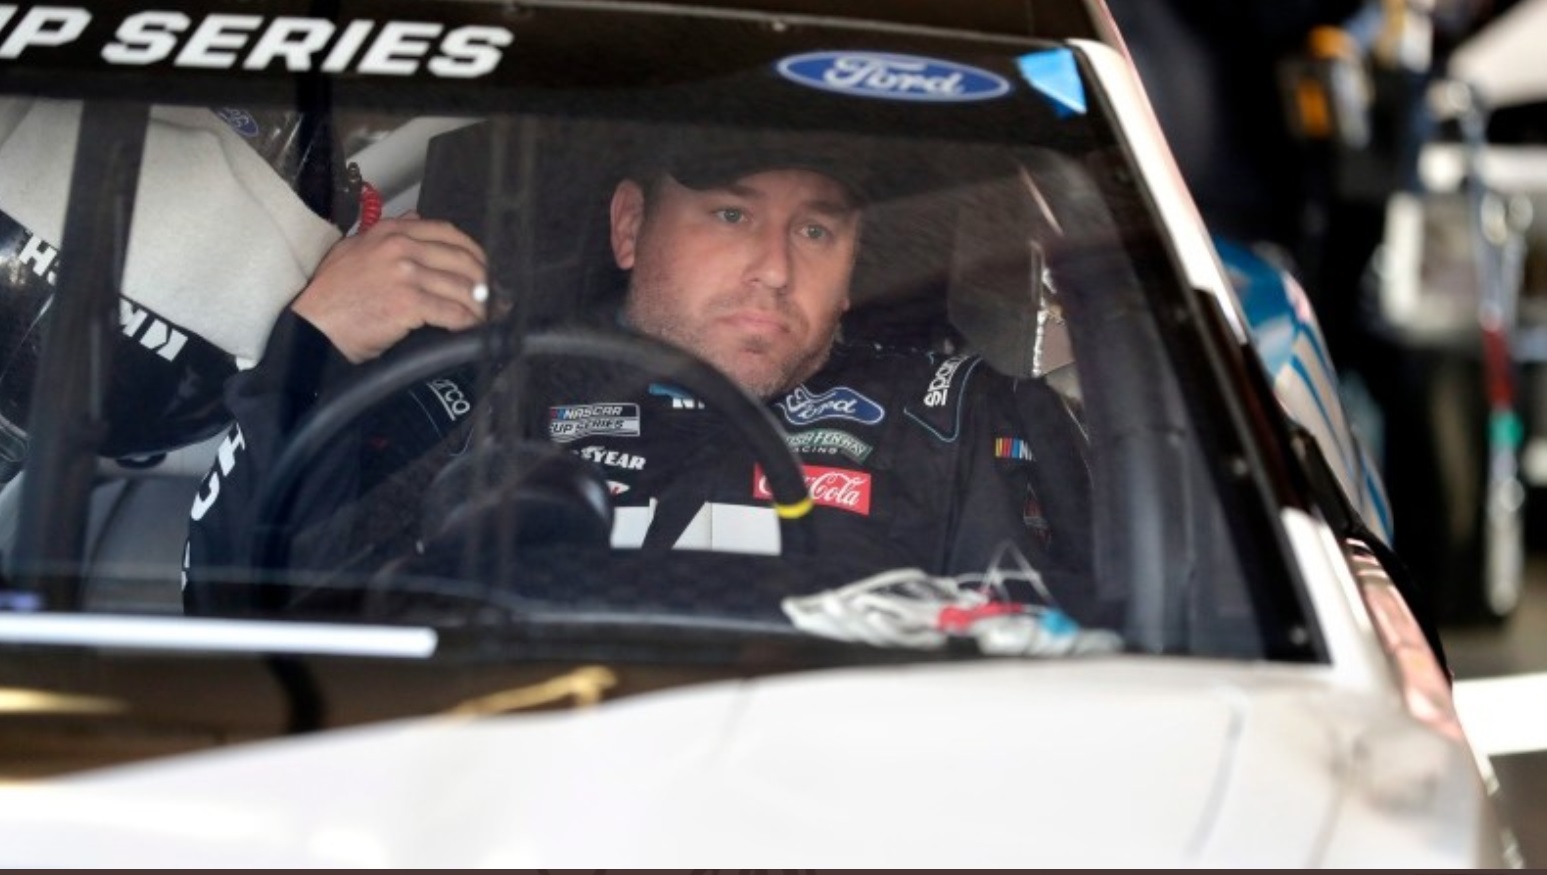 PHOTO Ryan Newman In His Race Car Without A Helmet